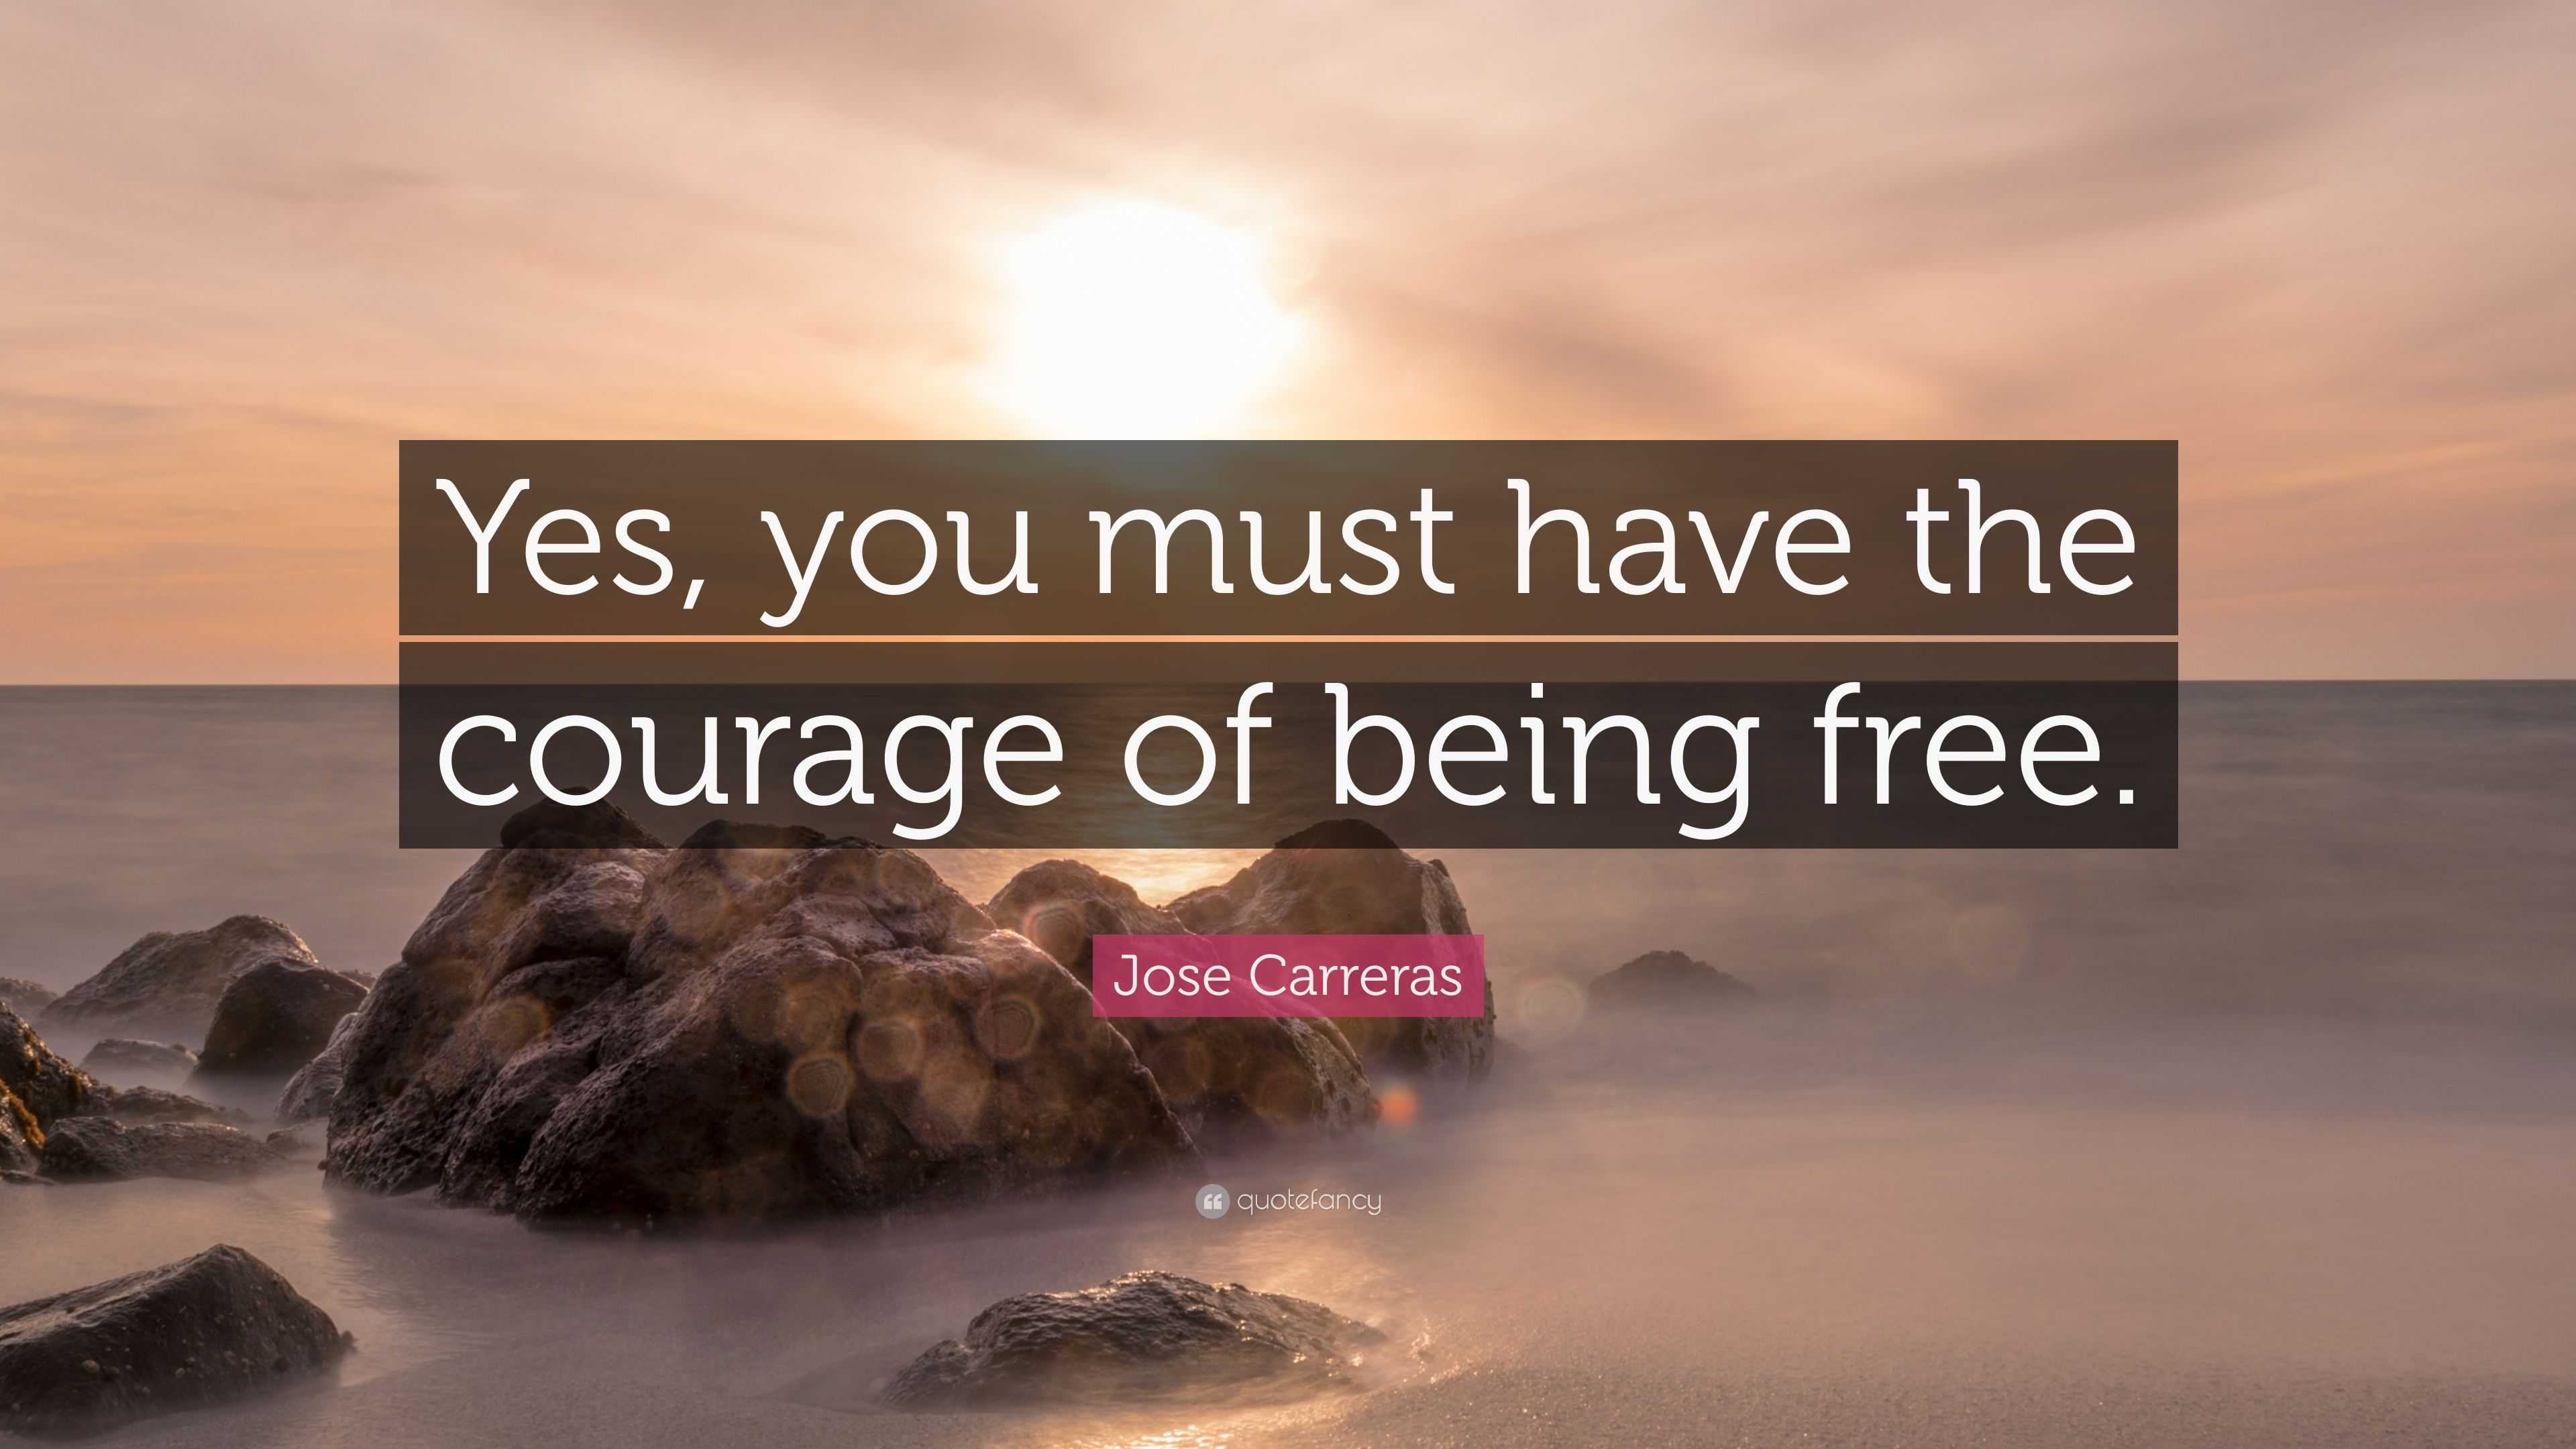 Jose Carreras Quote: “Yes, you must have the courage of being free.”